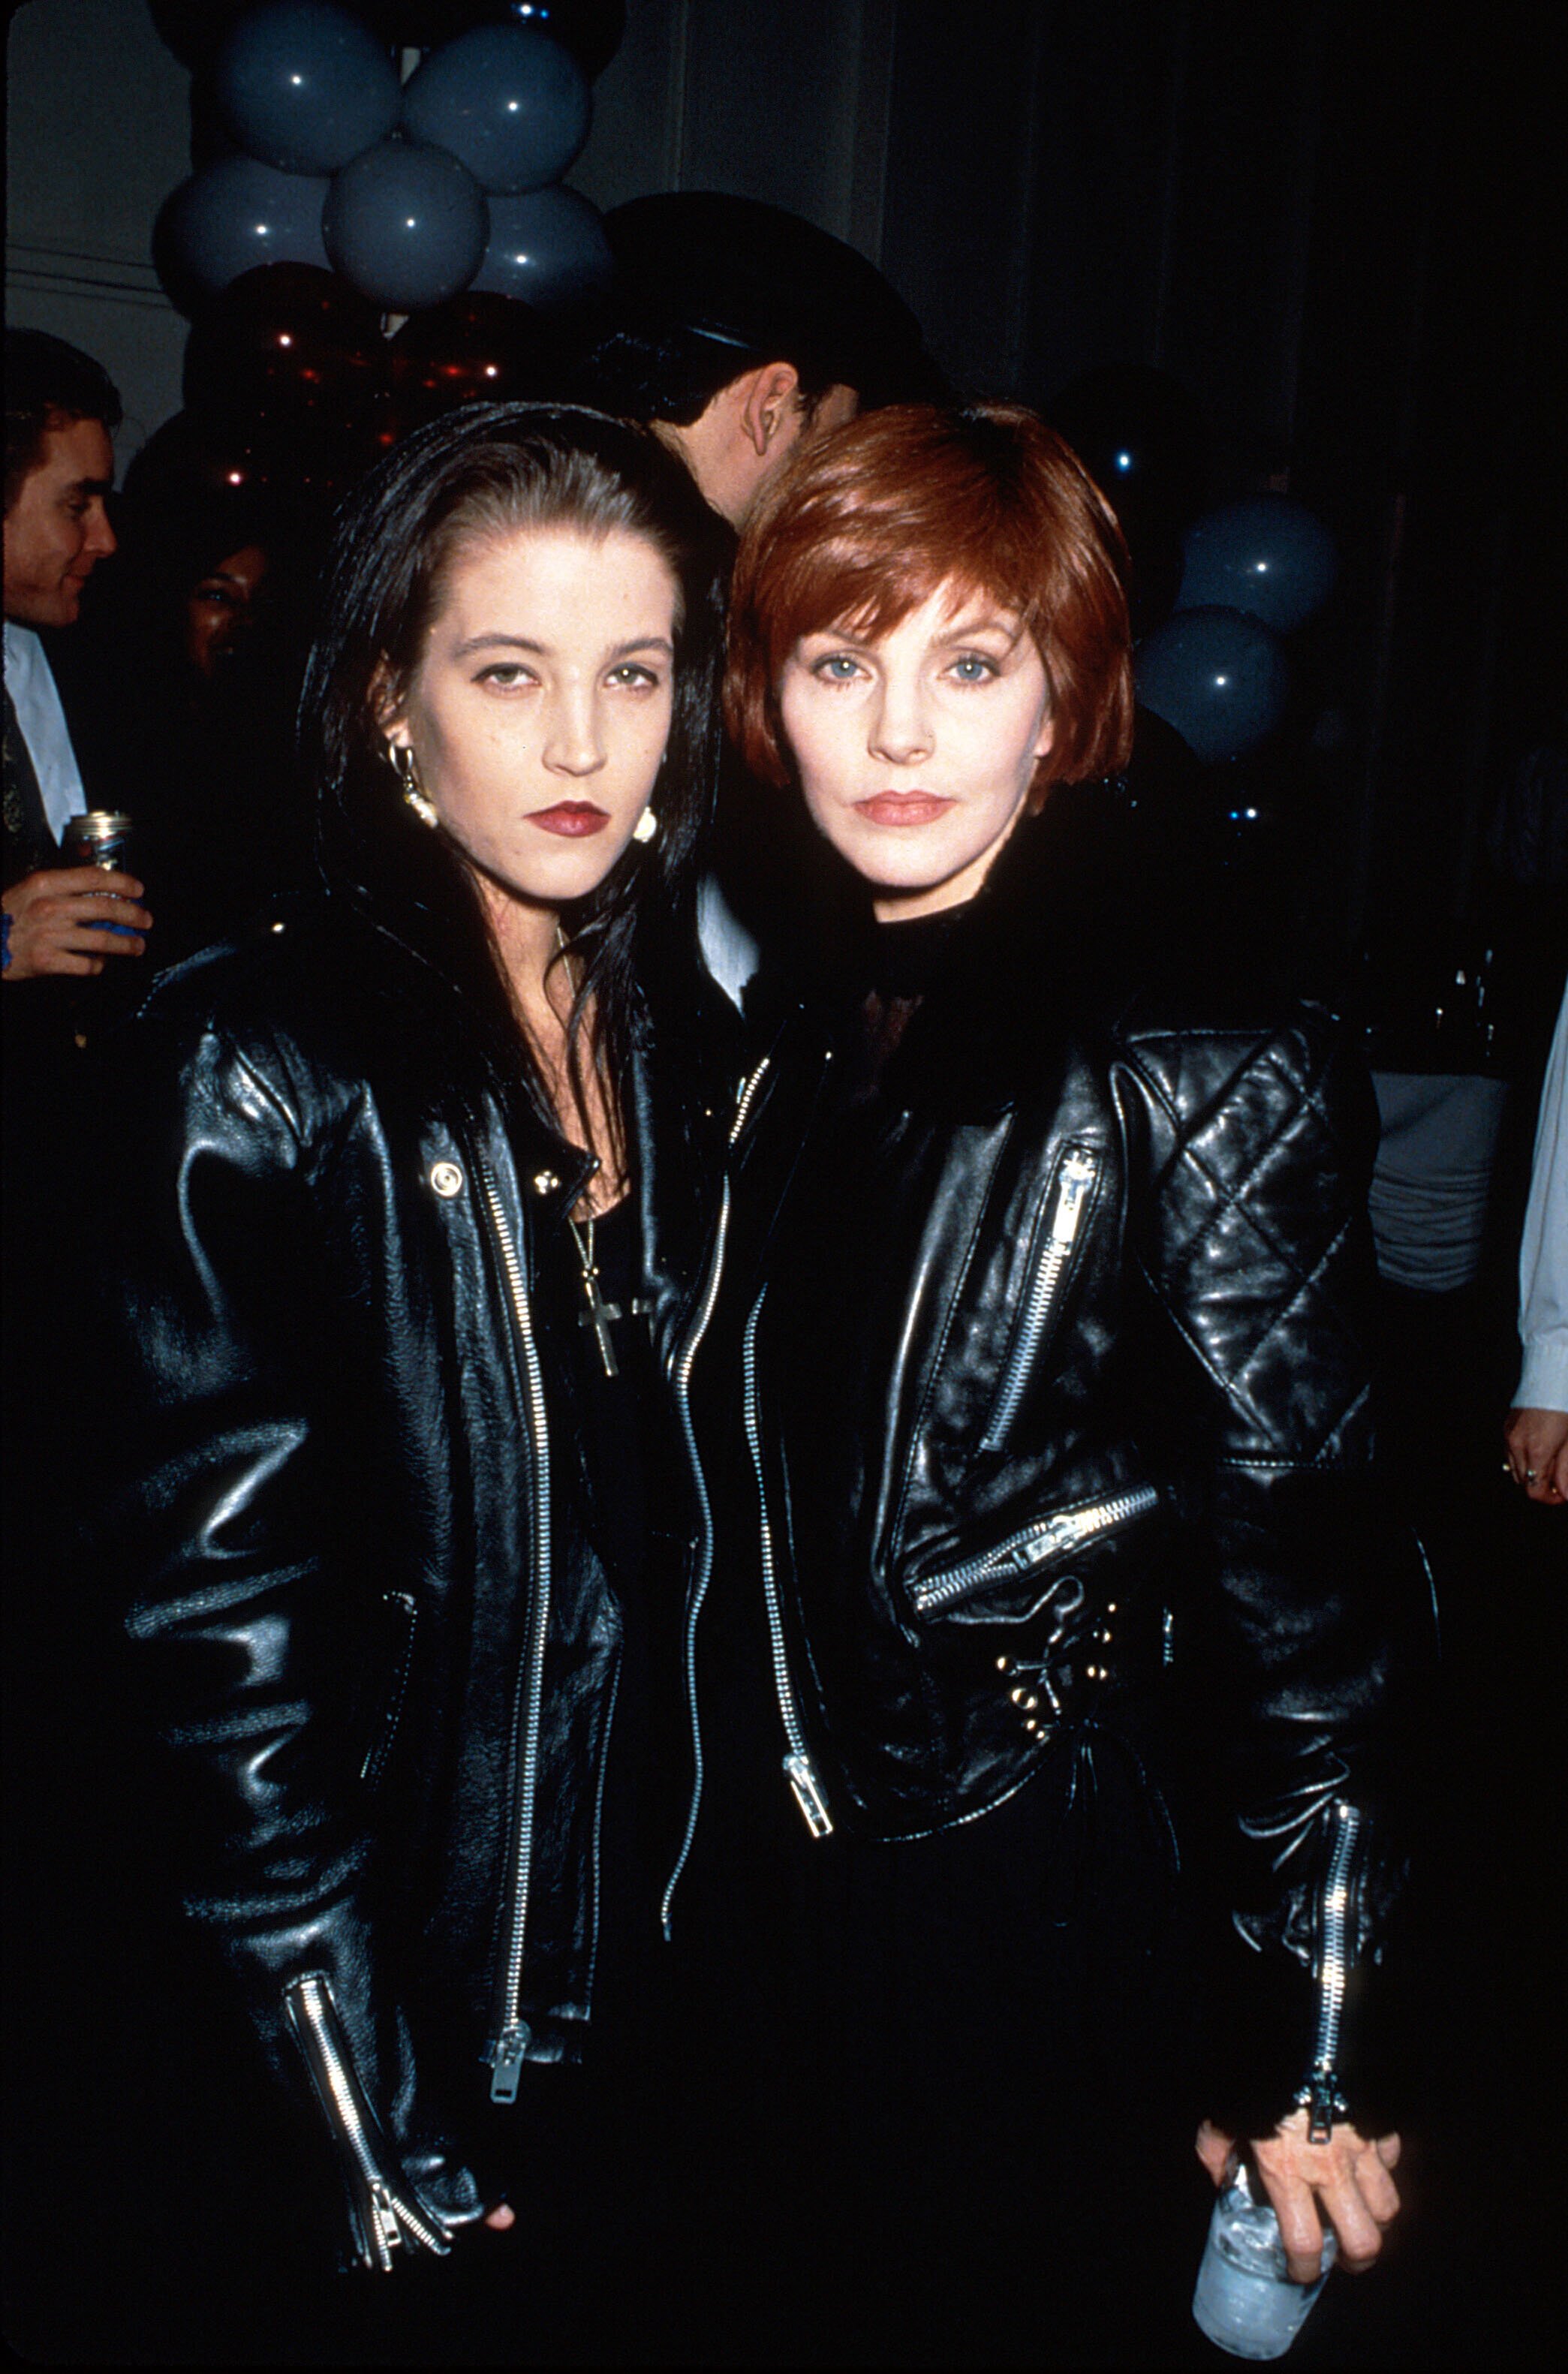 Priscilla Presley S Relationship With Daughter Lisa Marie Has Been Through Plenty Of Ups And Downs